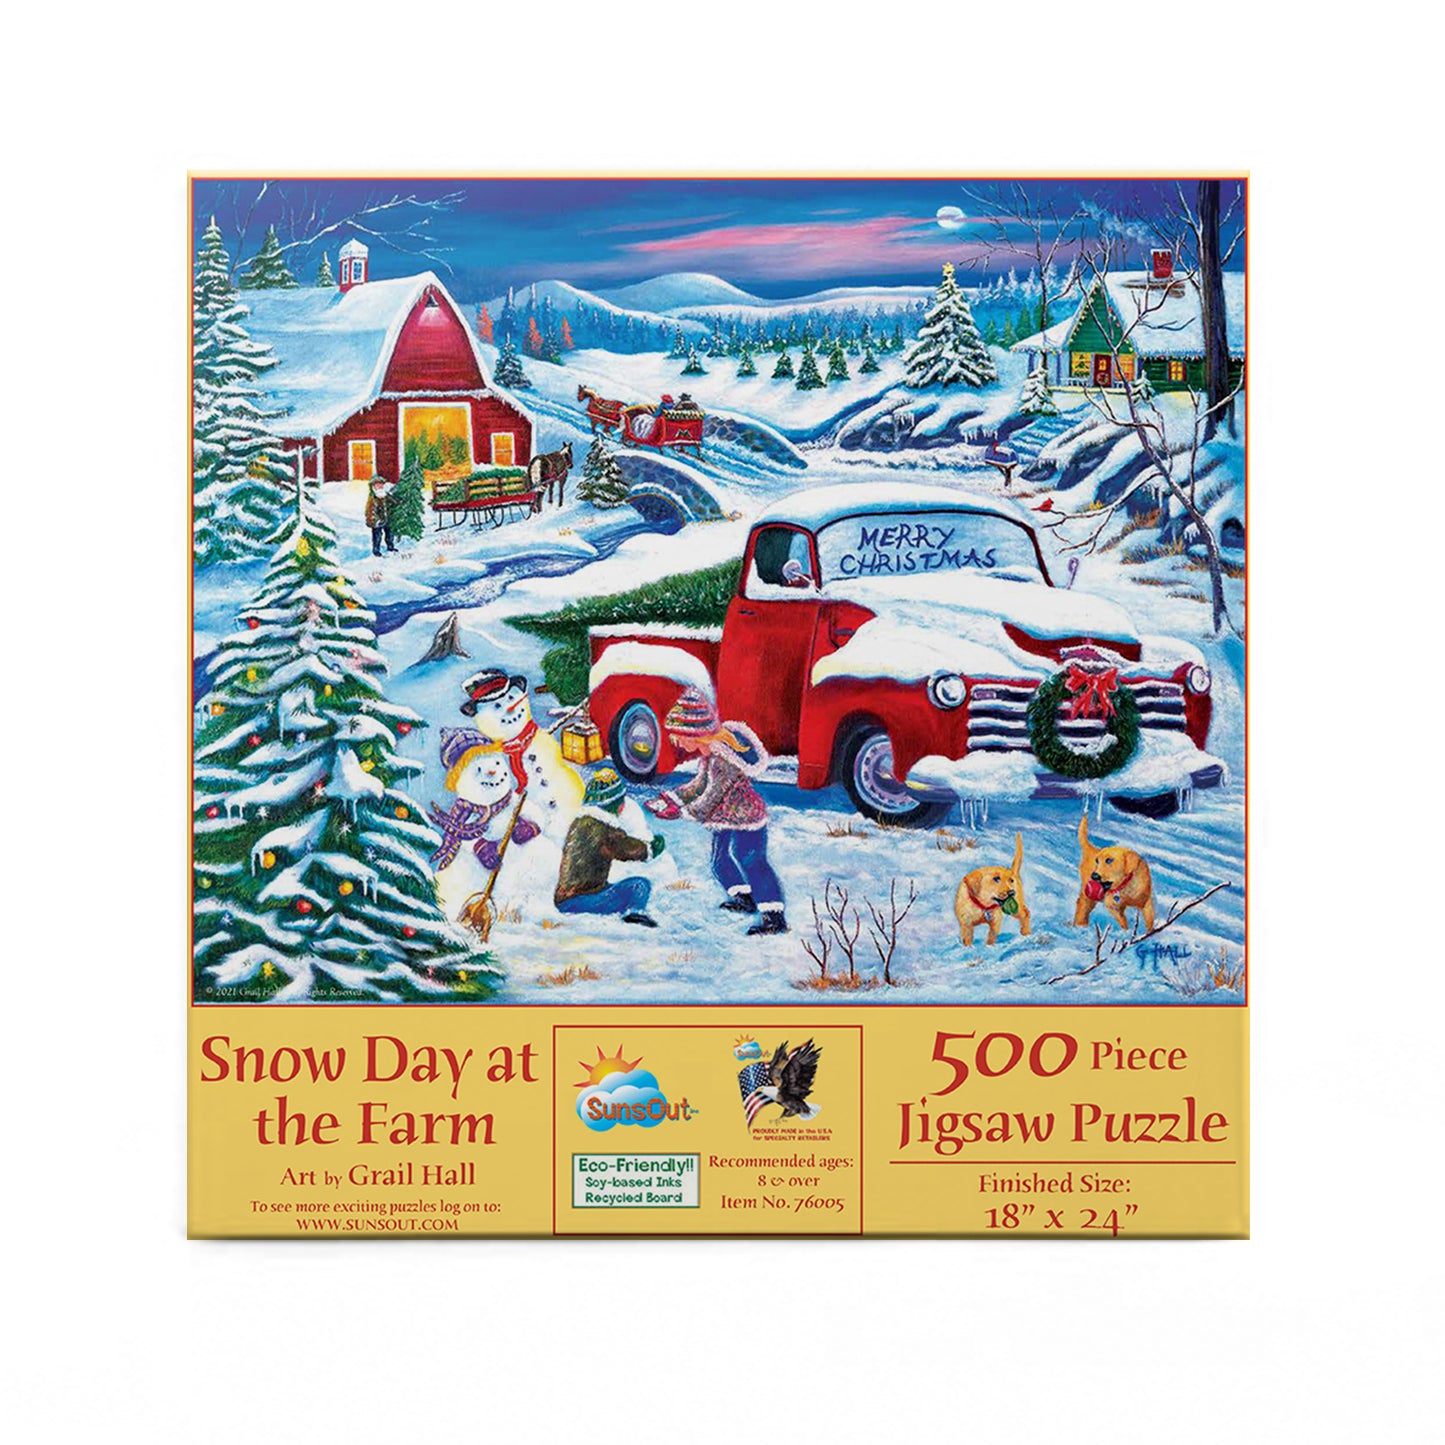 Snow Day at the Farm - 500 Piece Jigsaw Puzzle